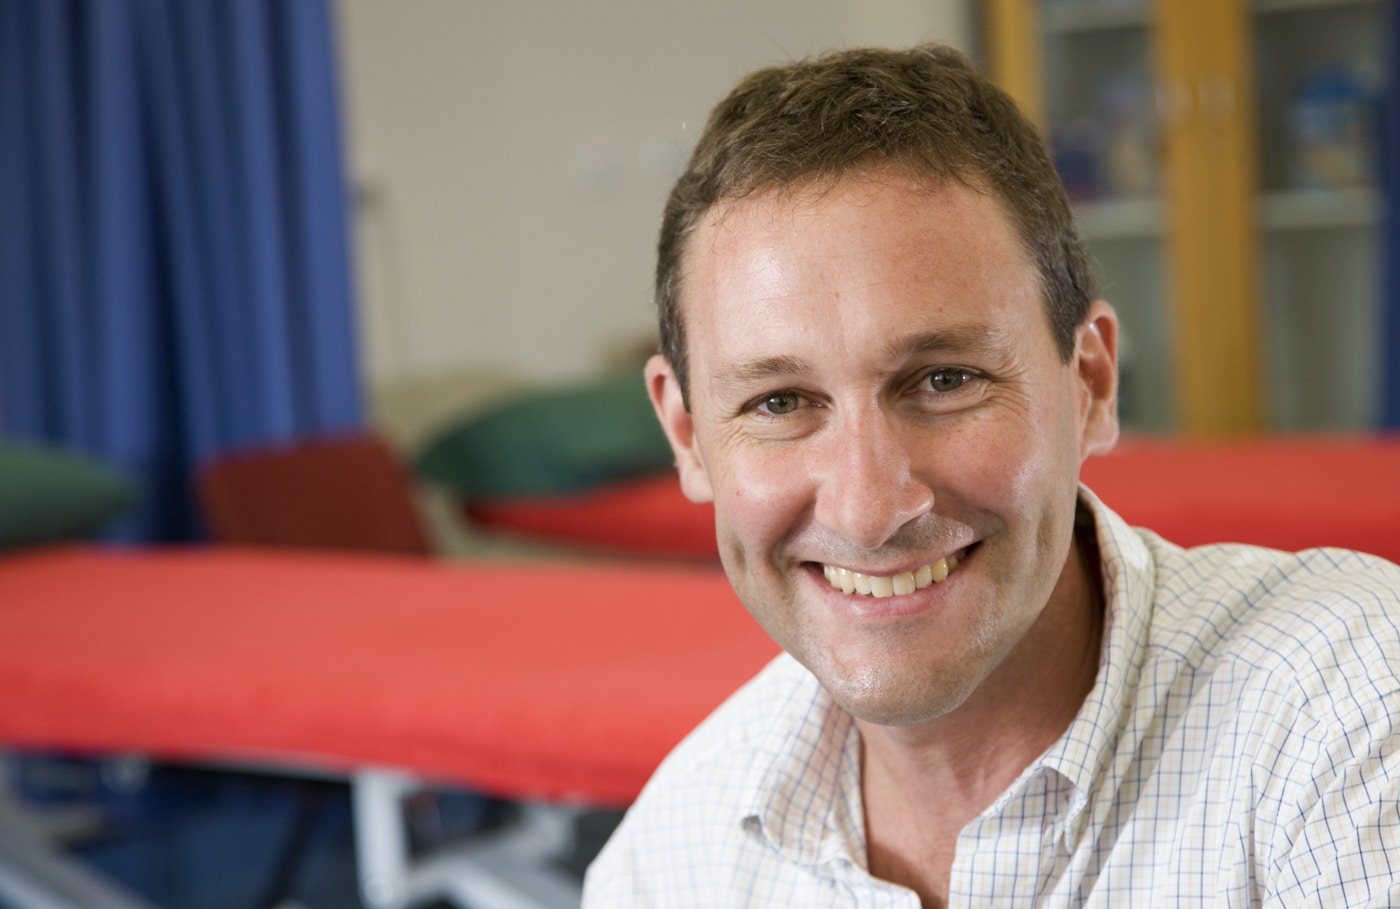 Richard Newsham-West, director of the new Physiotherapy clinic.